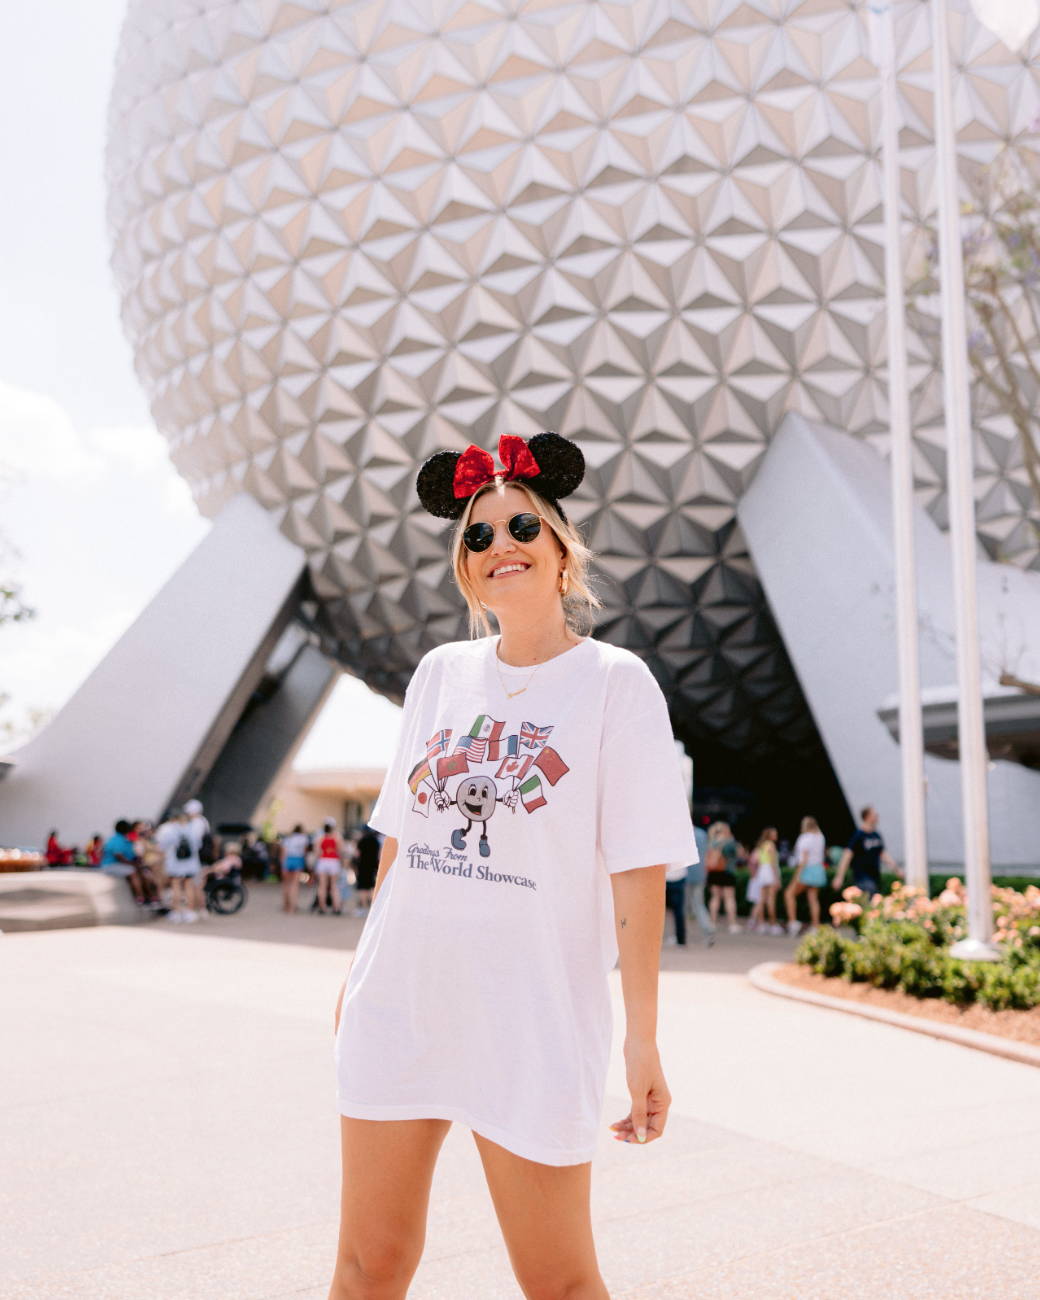 EPCOT Food and Wine Festival 2023 News: Eat To The Beat Concert Lineup Revealed!!